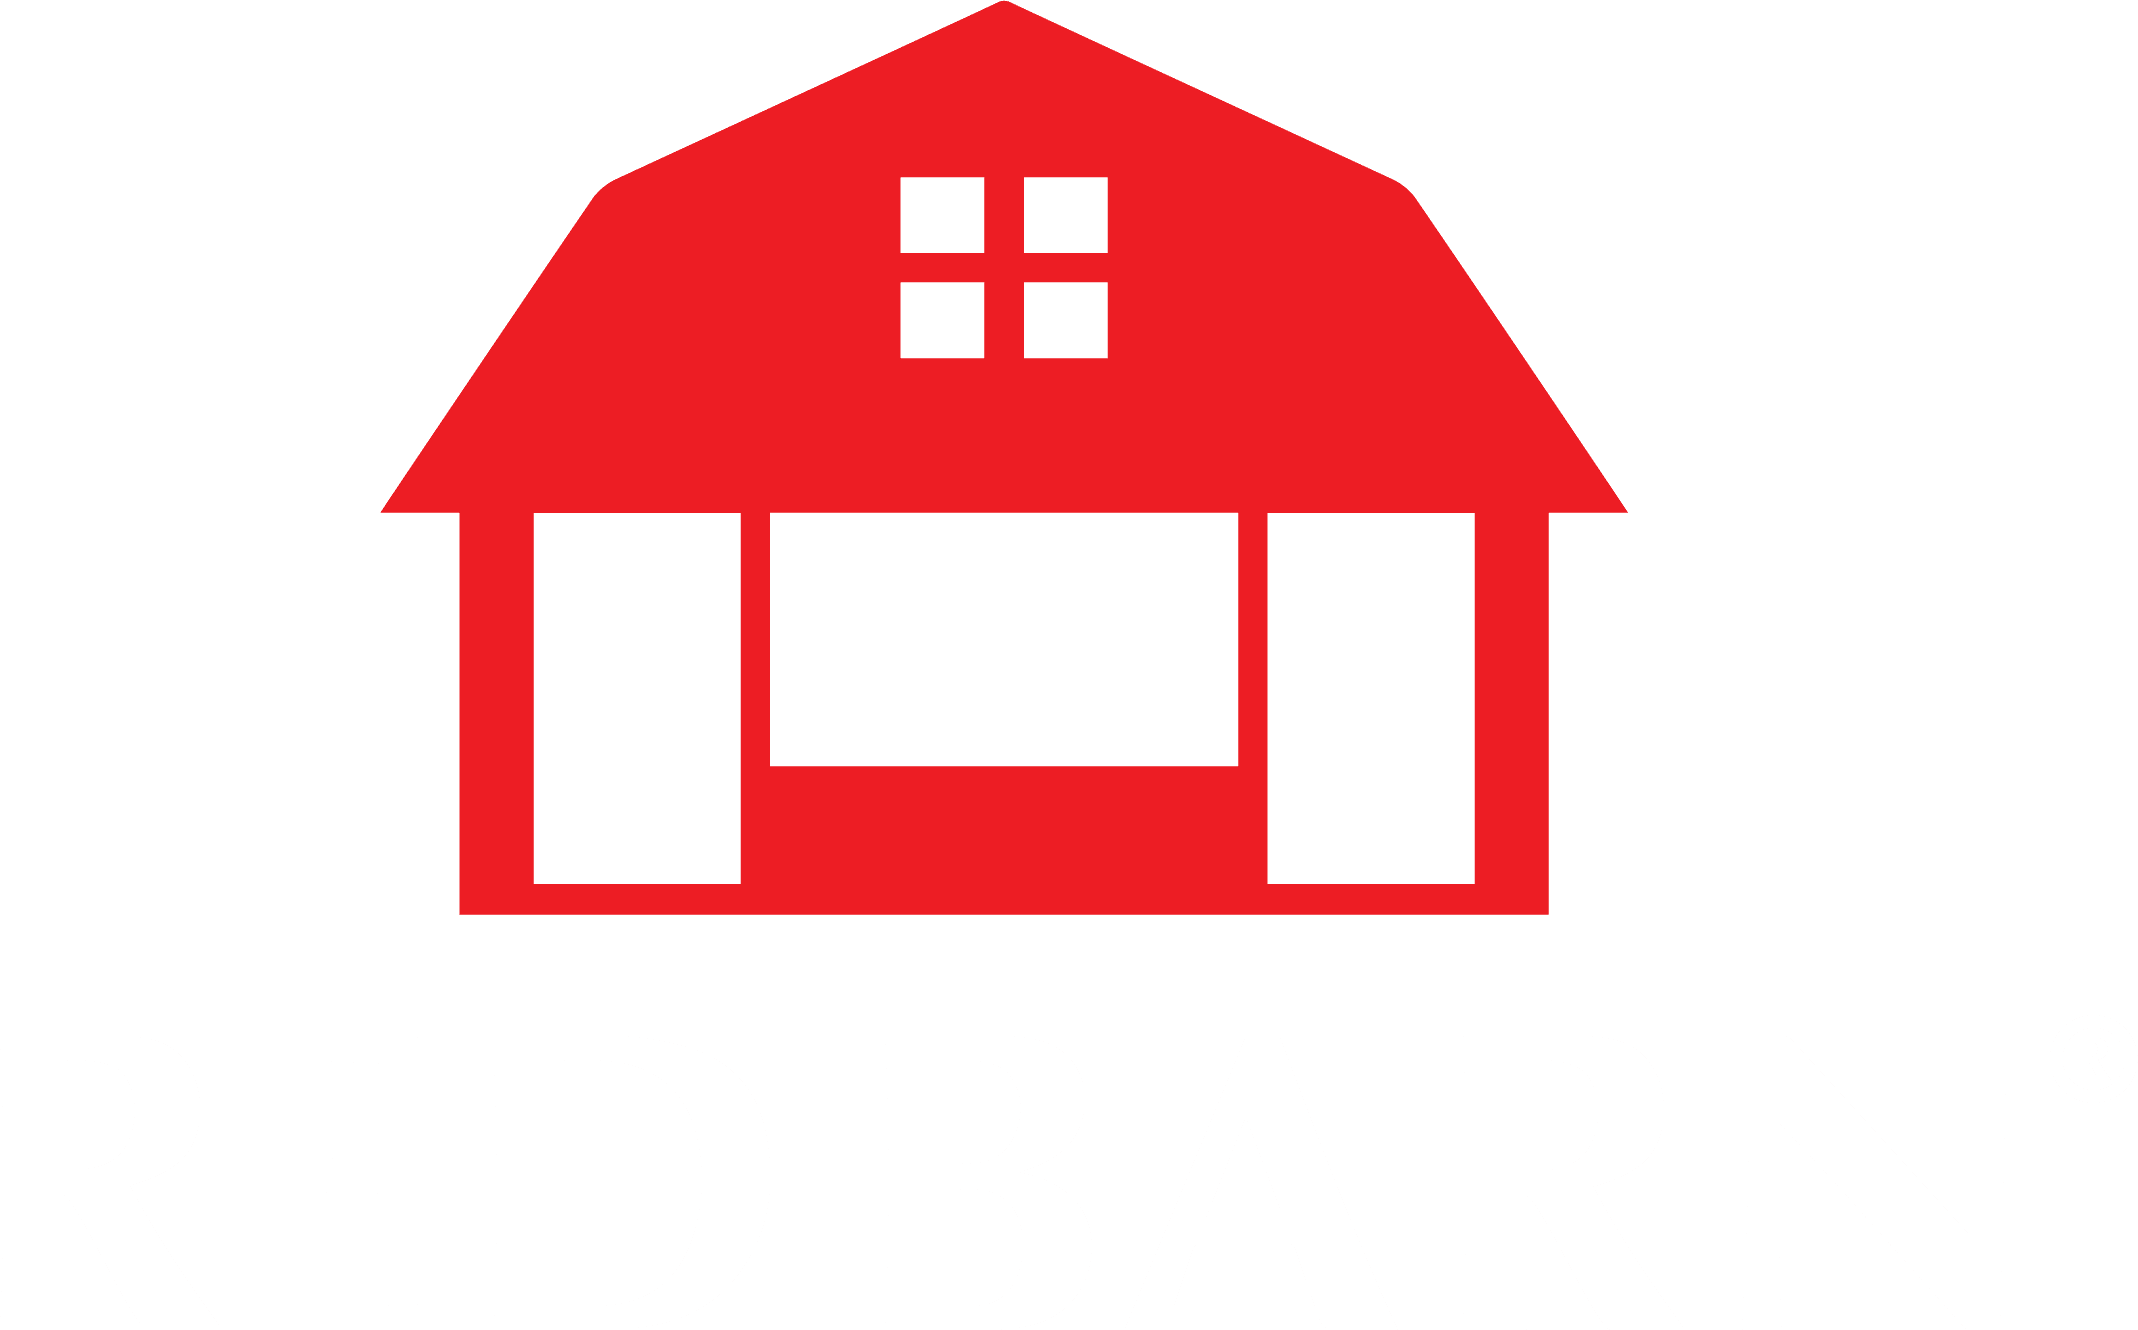 https://www.redbarnlife.com/wp-content/uploads/2022/08/RED-BARN-VERTICAL-LOGO-2021-White-Red.png